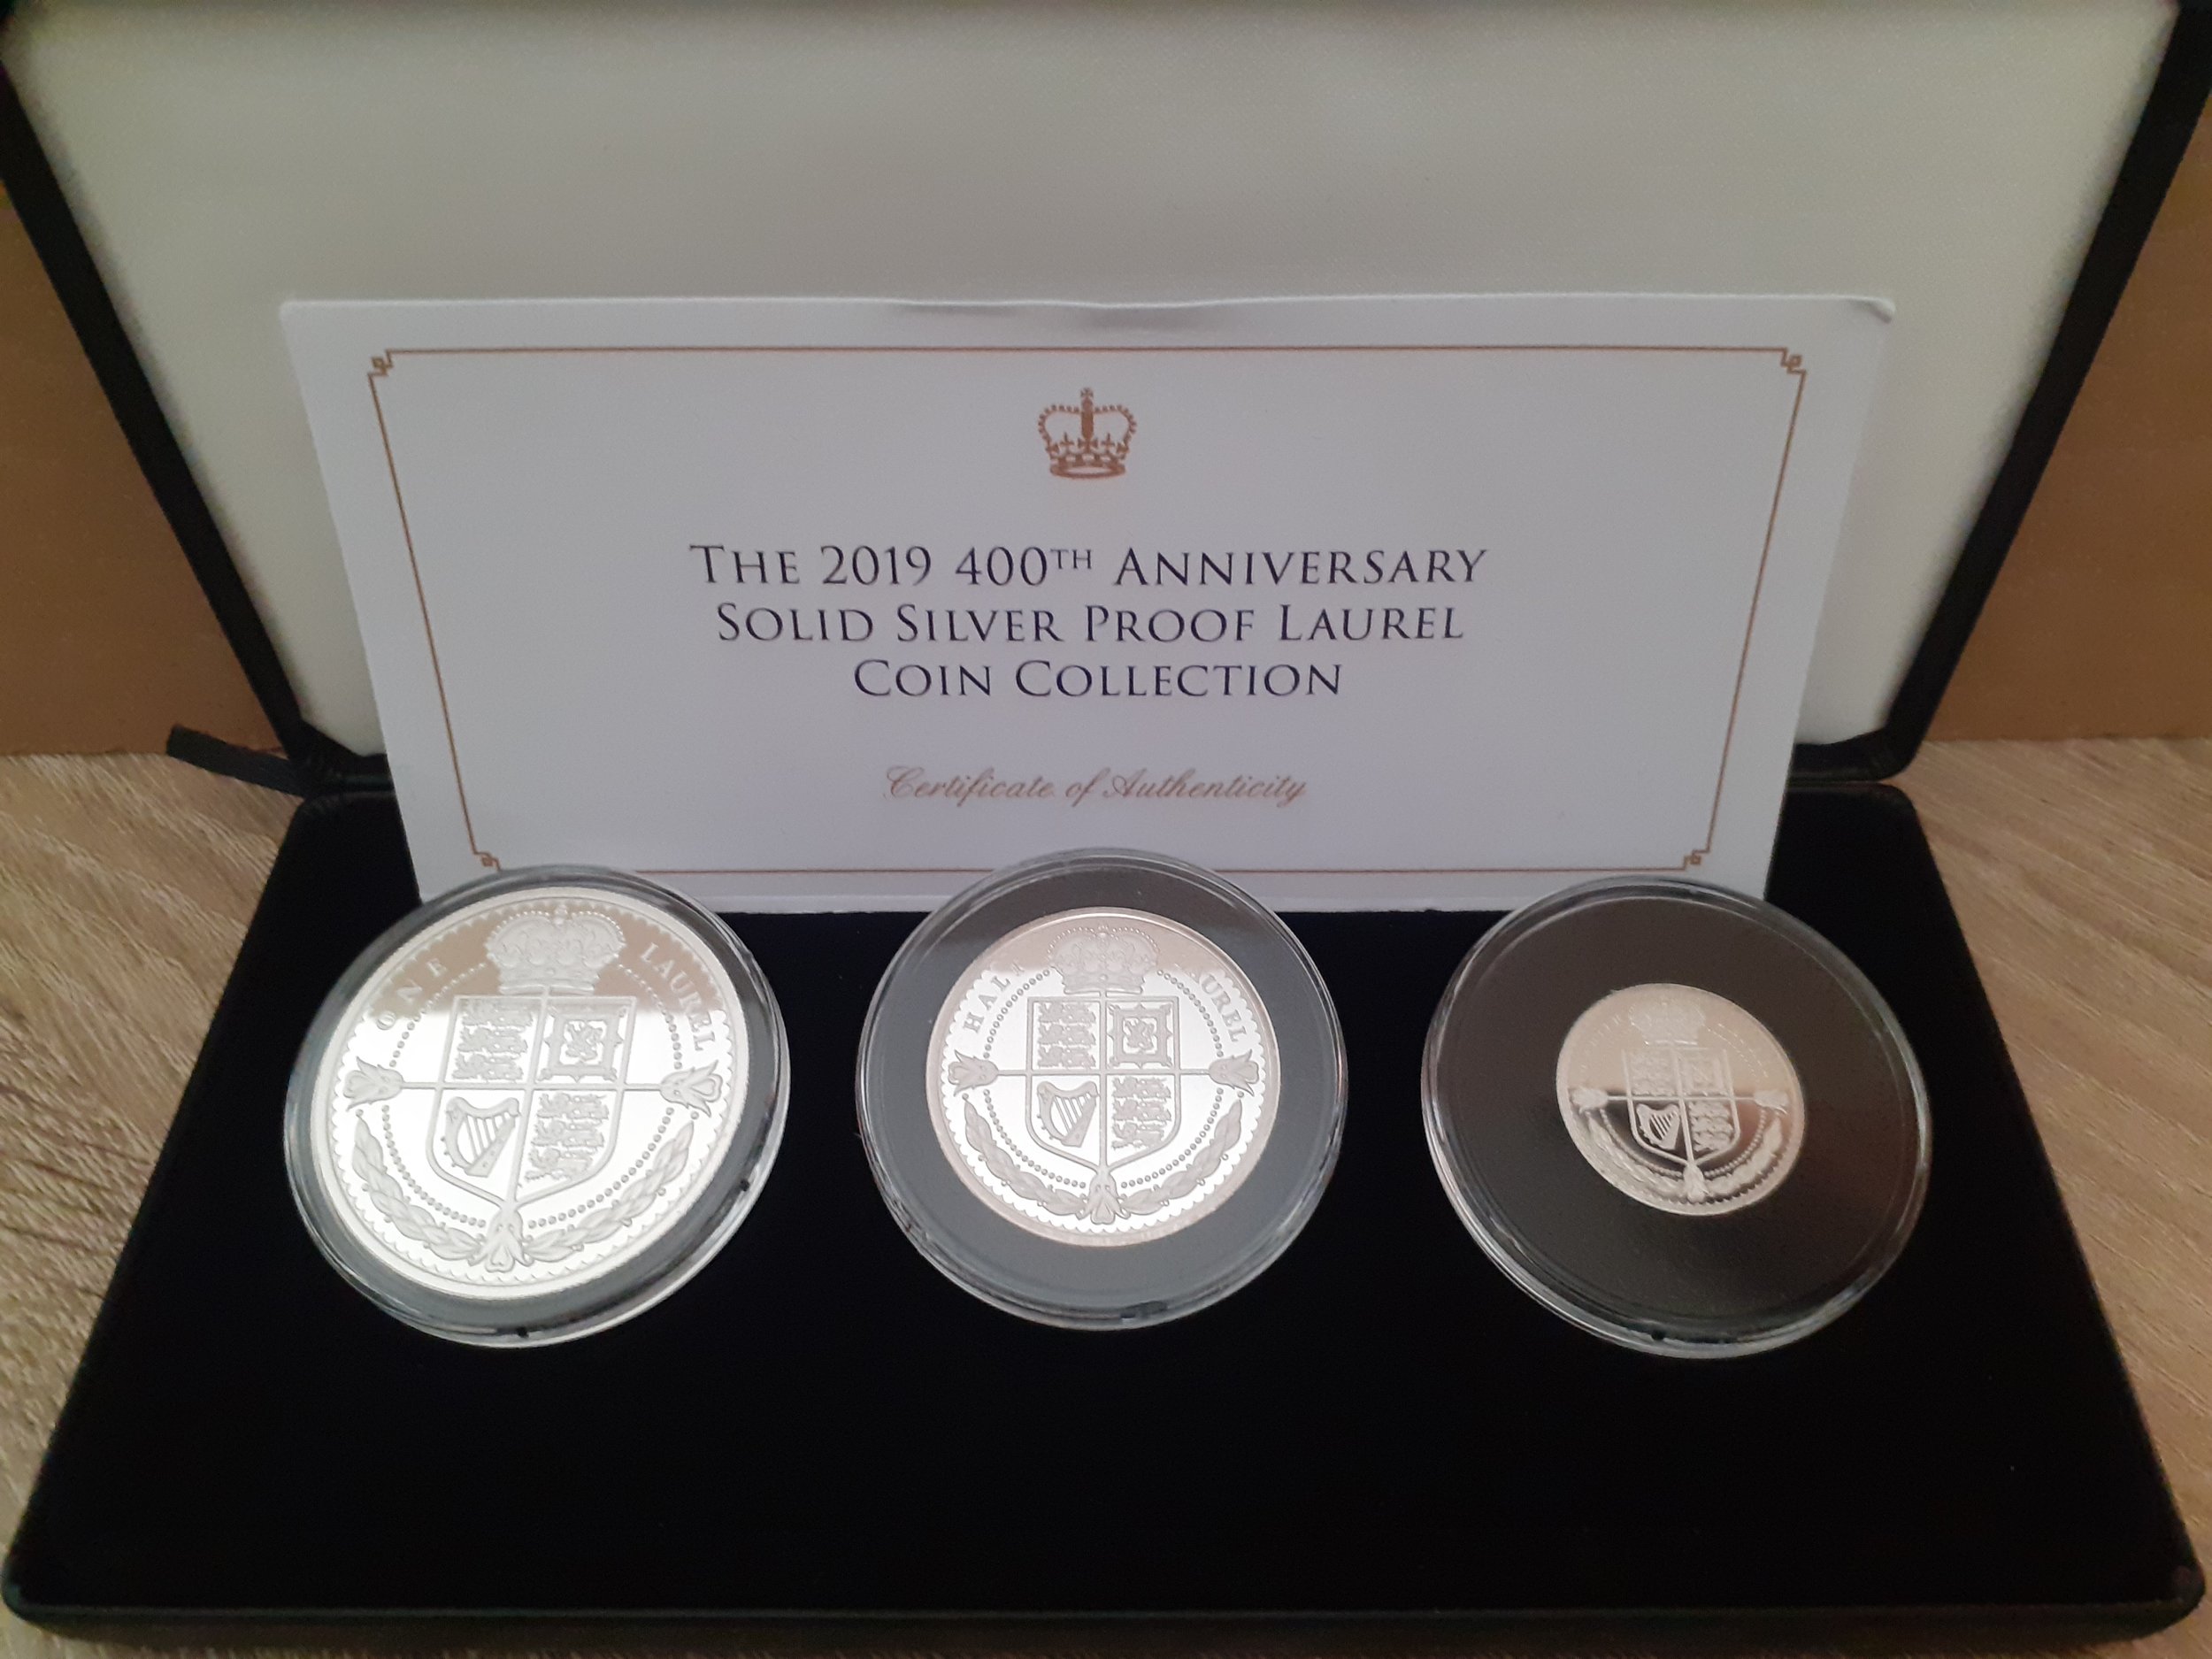 2019 Solid Silver Proof Laurel Coin Collection.